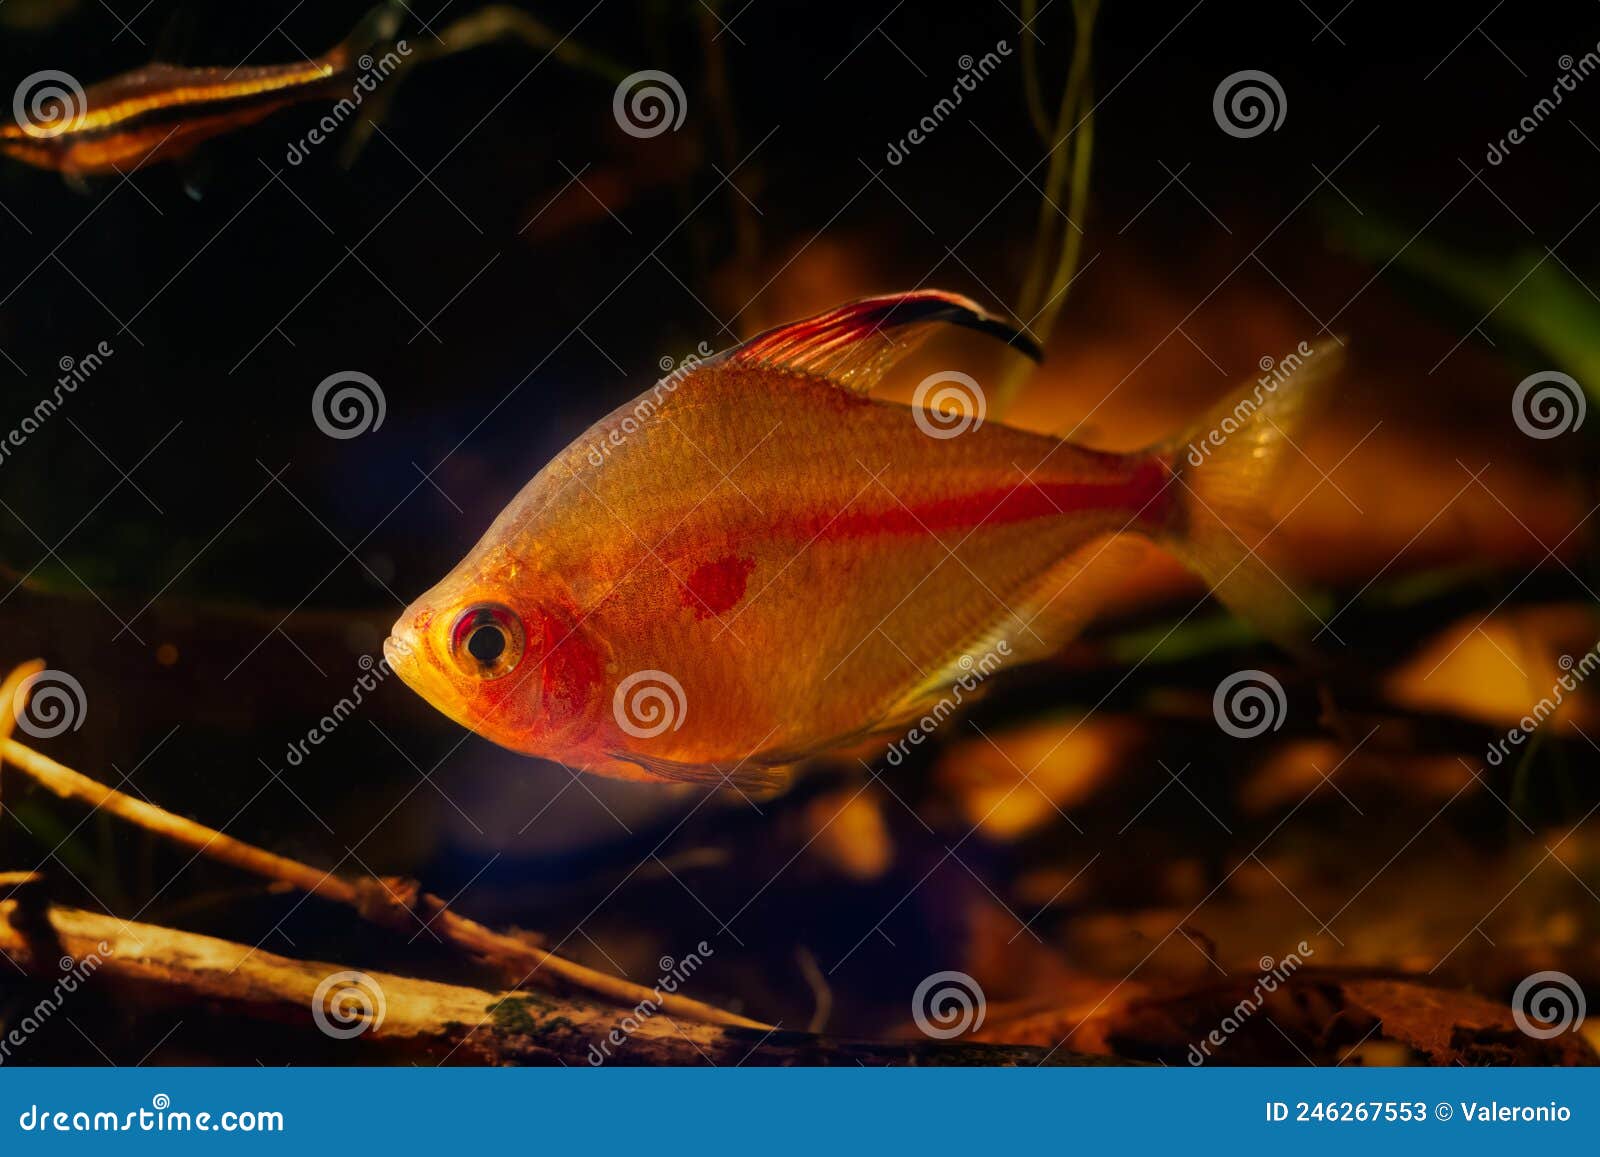 bleeding heart tetra, neon glowing red color shine in low backlight, relaxed and aggressive rio negro endemic characin